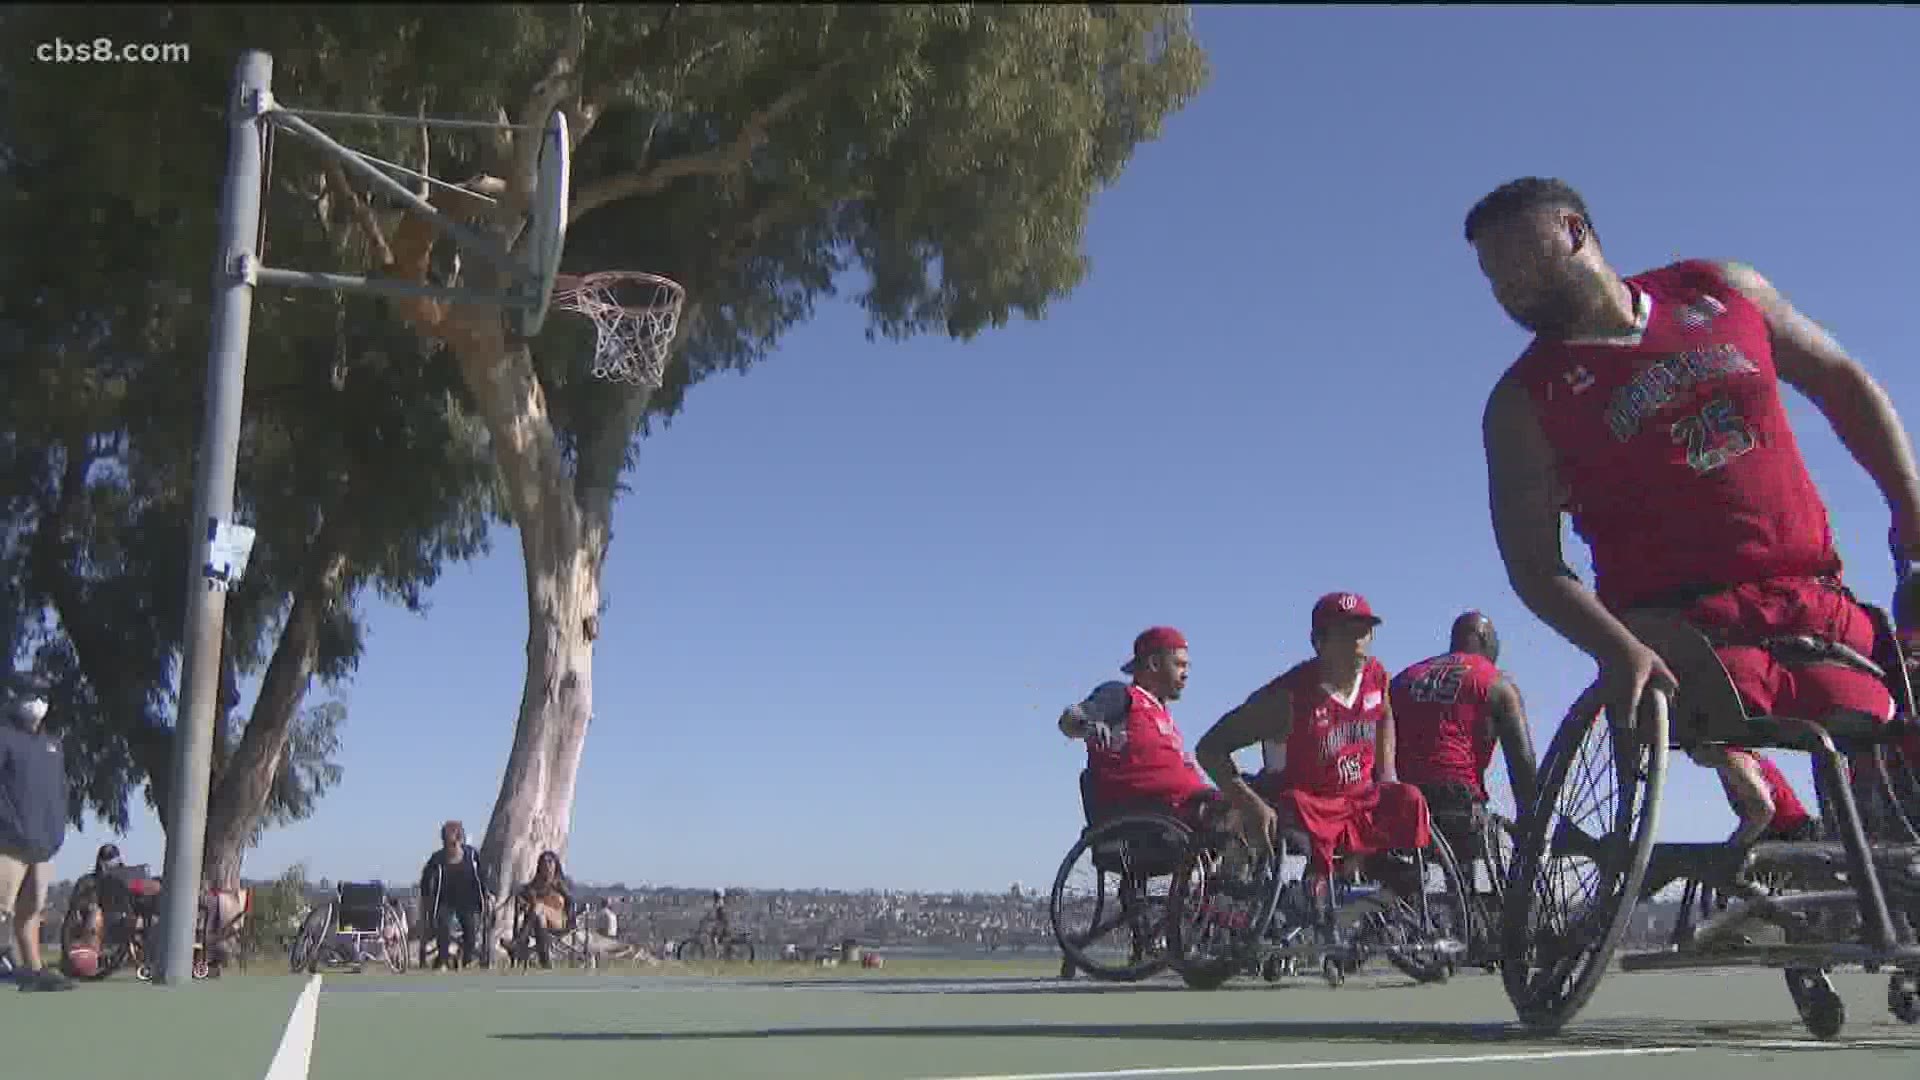 Some veterans have found their competitive edge on the basketball court.